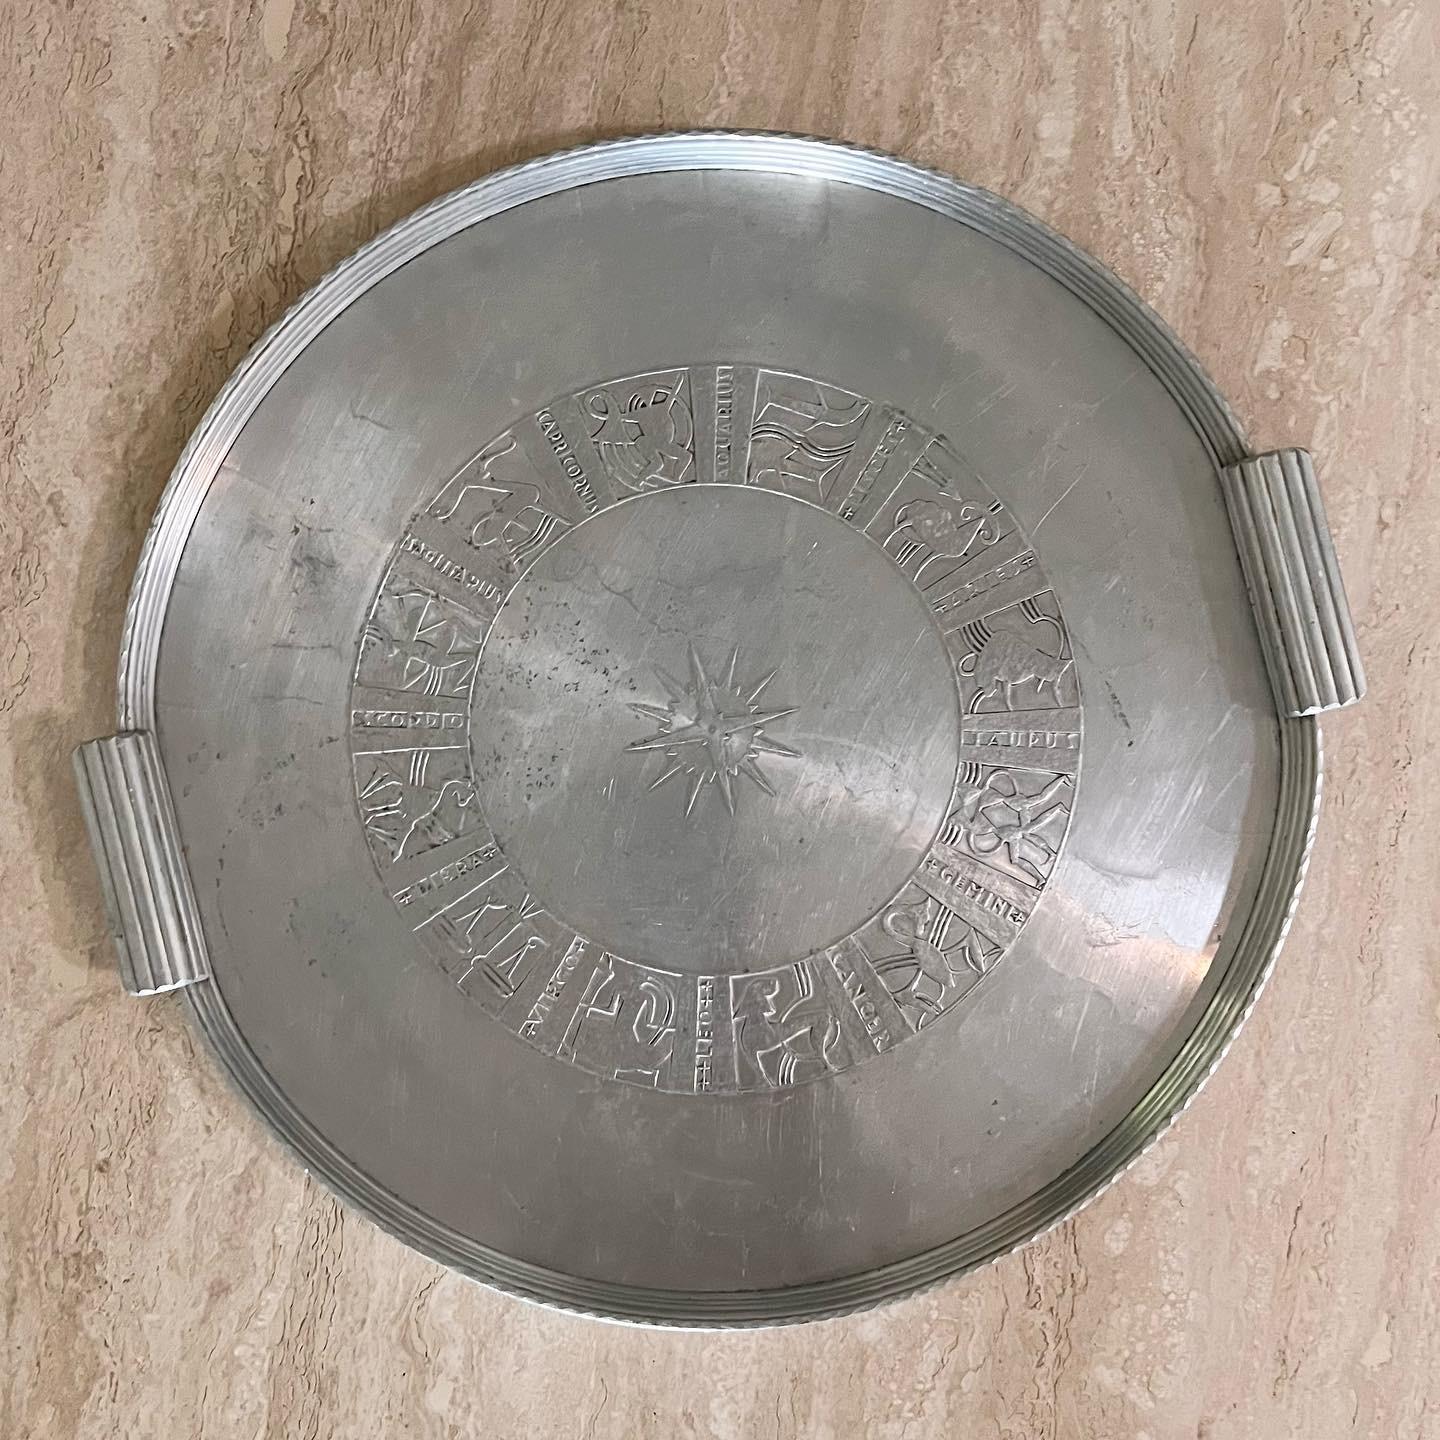 WHAT’S YOUR SIGN? a vintage metal zodiac serving tray by Arthur Armour, 1960s. Hand-crafted hammered aluminum; maker’s mark in photos. Featuring Aries, Taurus, Gemini, Cancer, Leo, Virgo, Libra, Scorpio, Sagittarius, Capricorn, Aquarius, and Pisces.